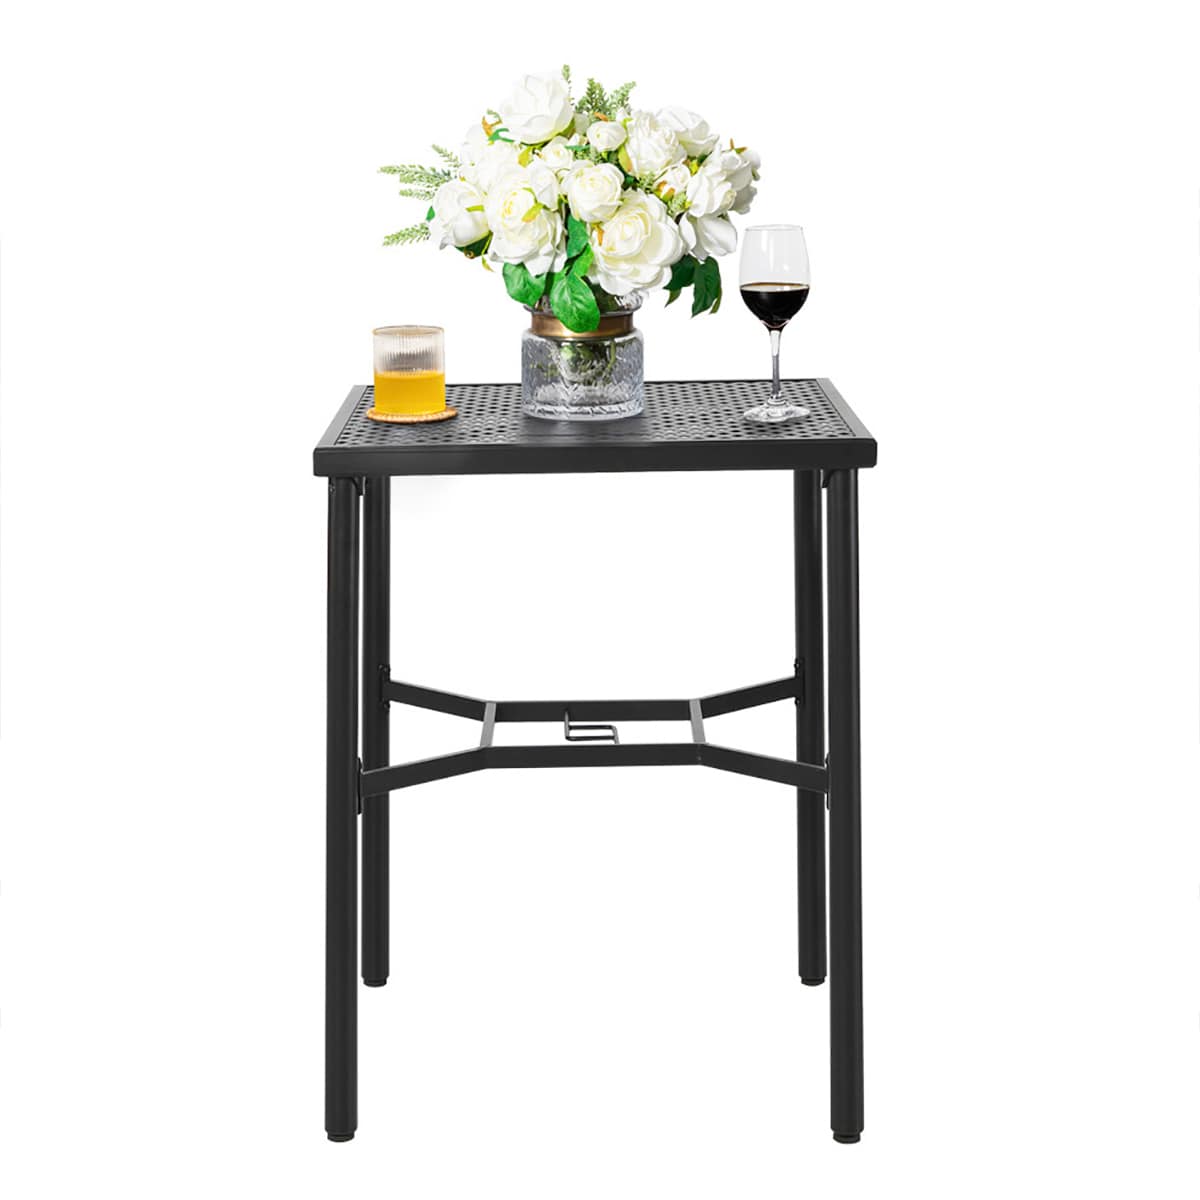 Nuu Garden Square Outdoor Bistro Table 2776 In W X 2776 In L With